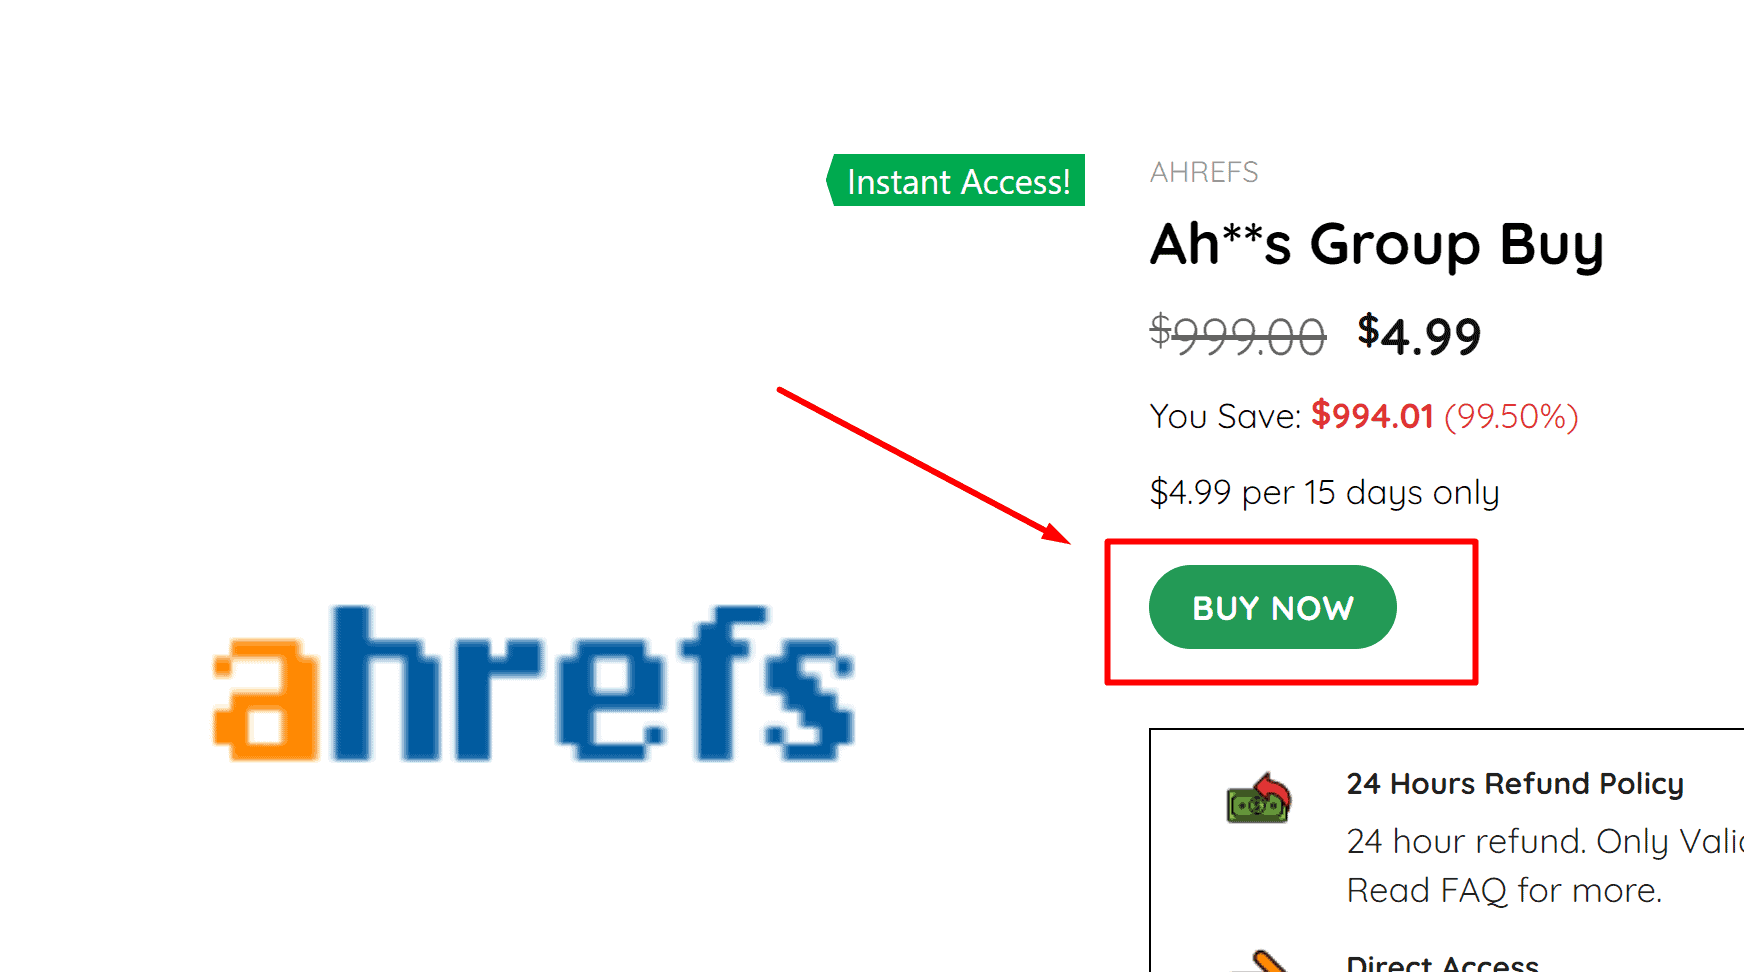 Ahrefs Group Buy Cheap Price Starting Just $4.99 Per Month